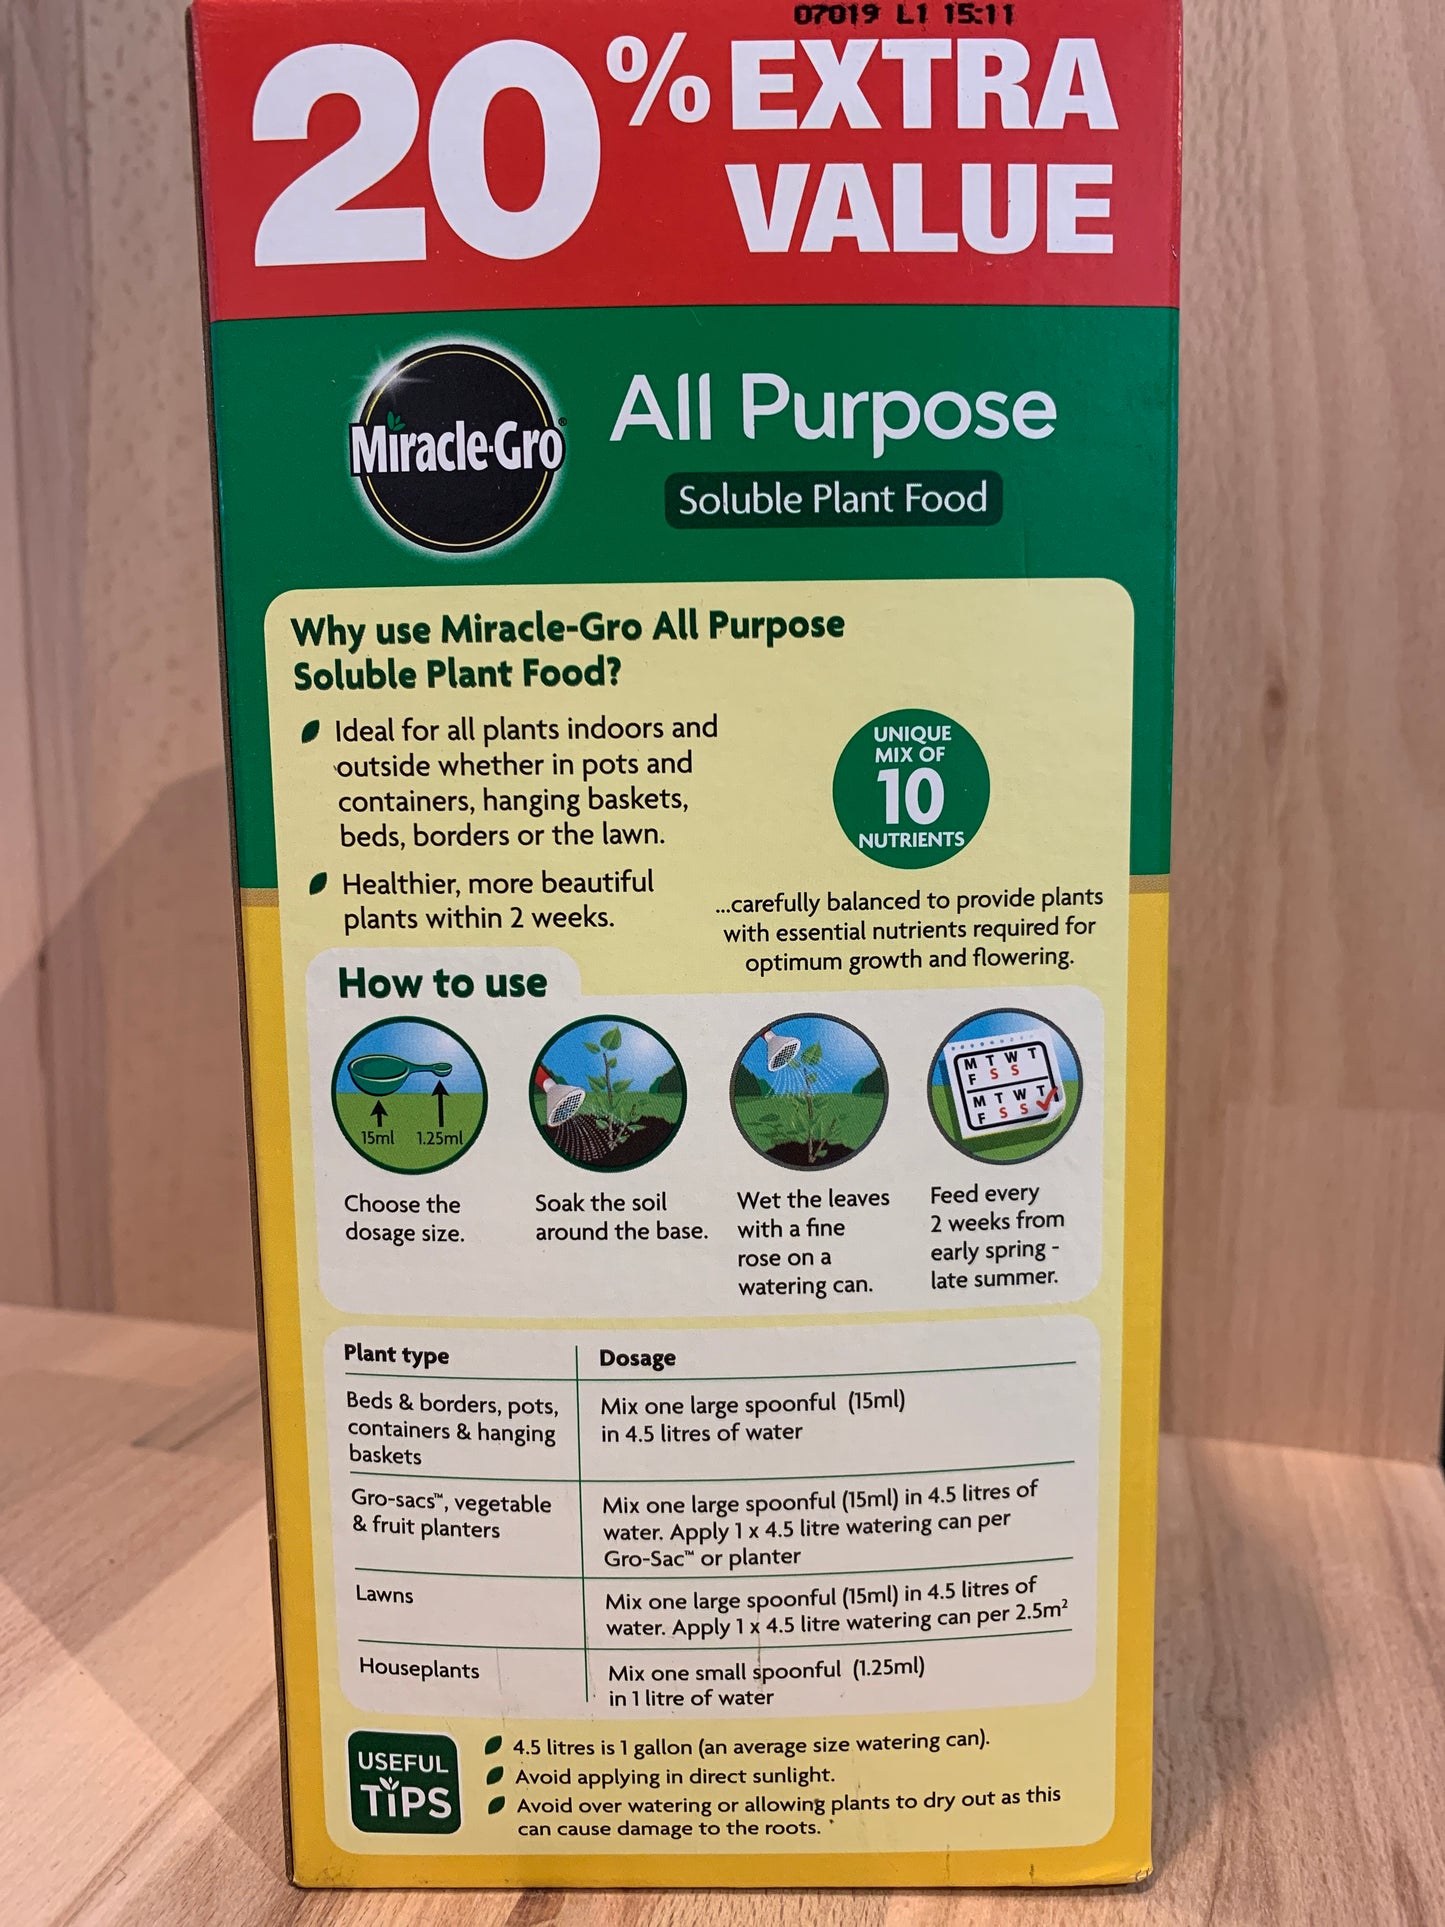 Miracle-Gro All Purpose Soluble Plant Food@